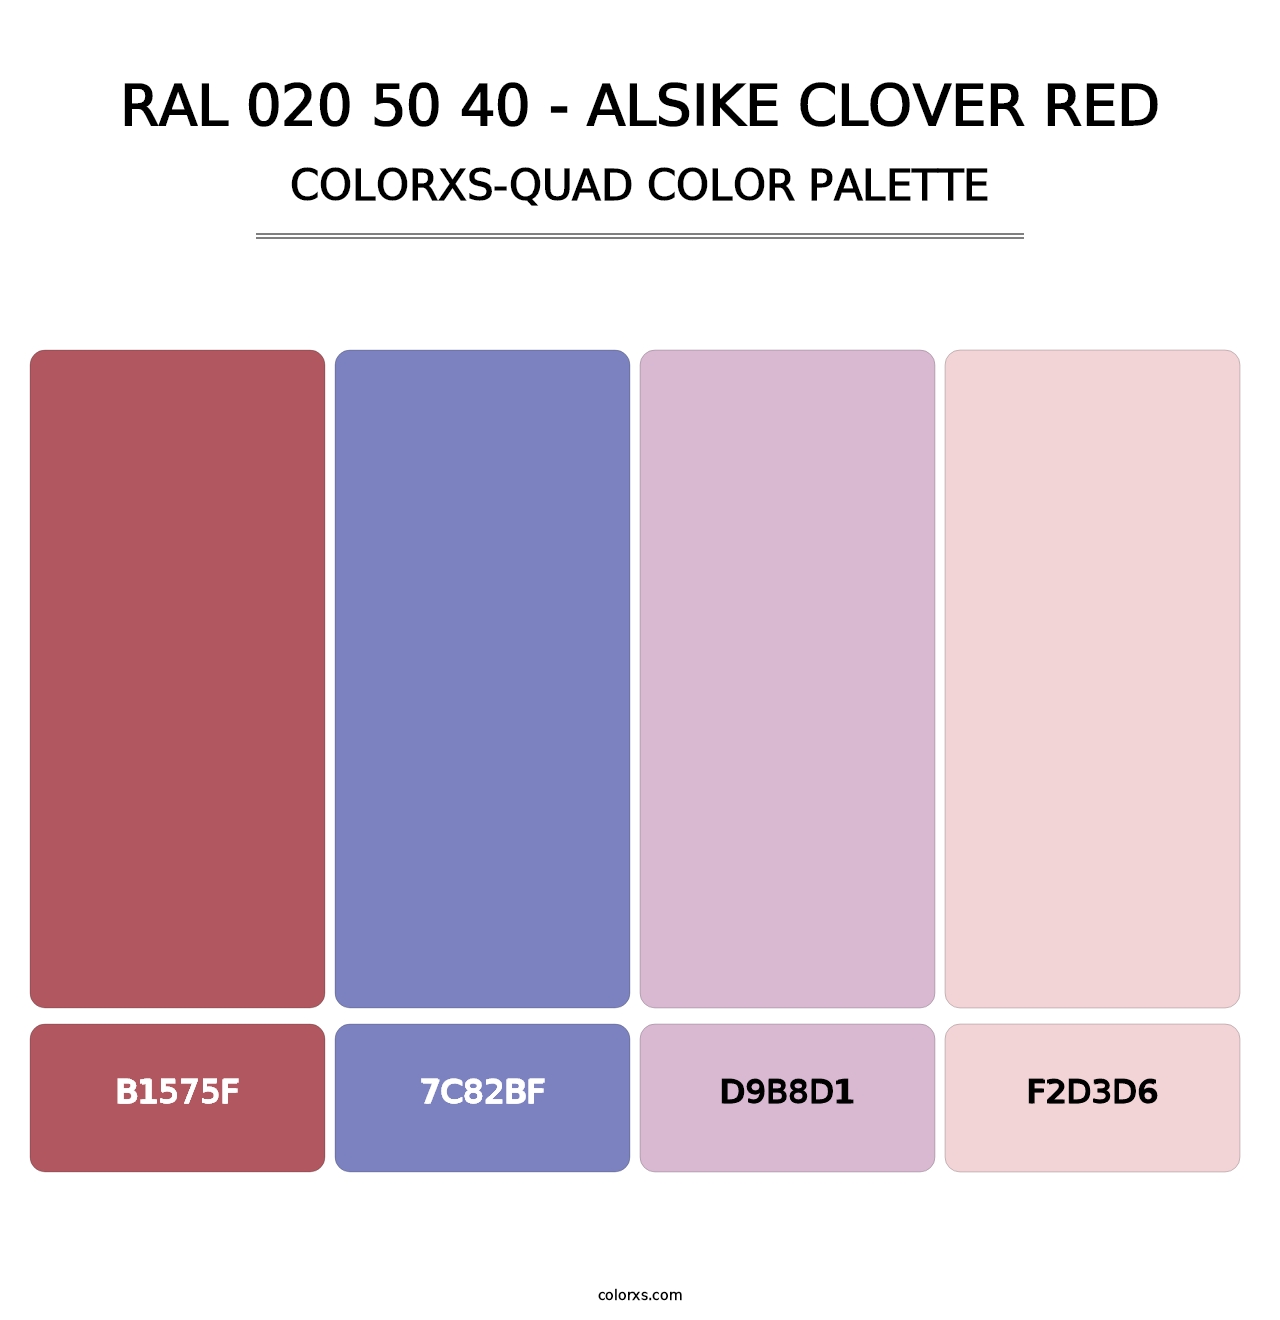 RAL 020 50 40 - Alsike Clover Red - Colorxs Quad Palette